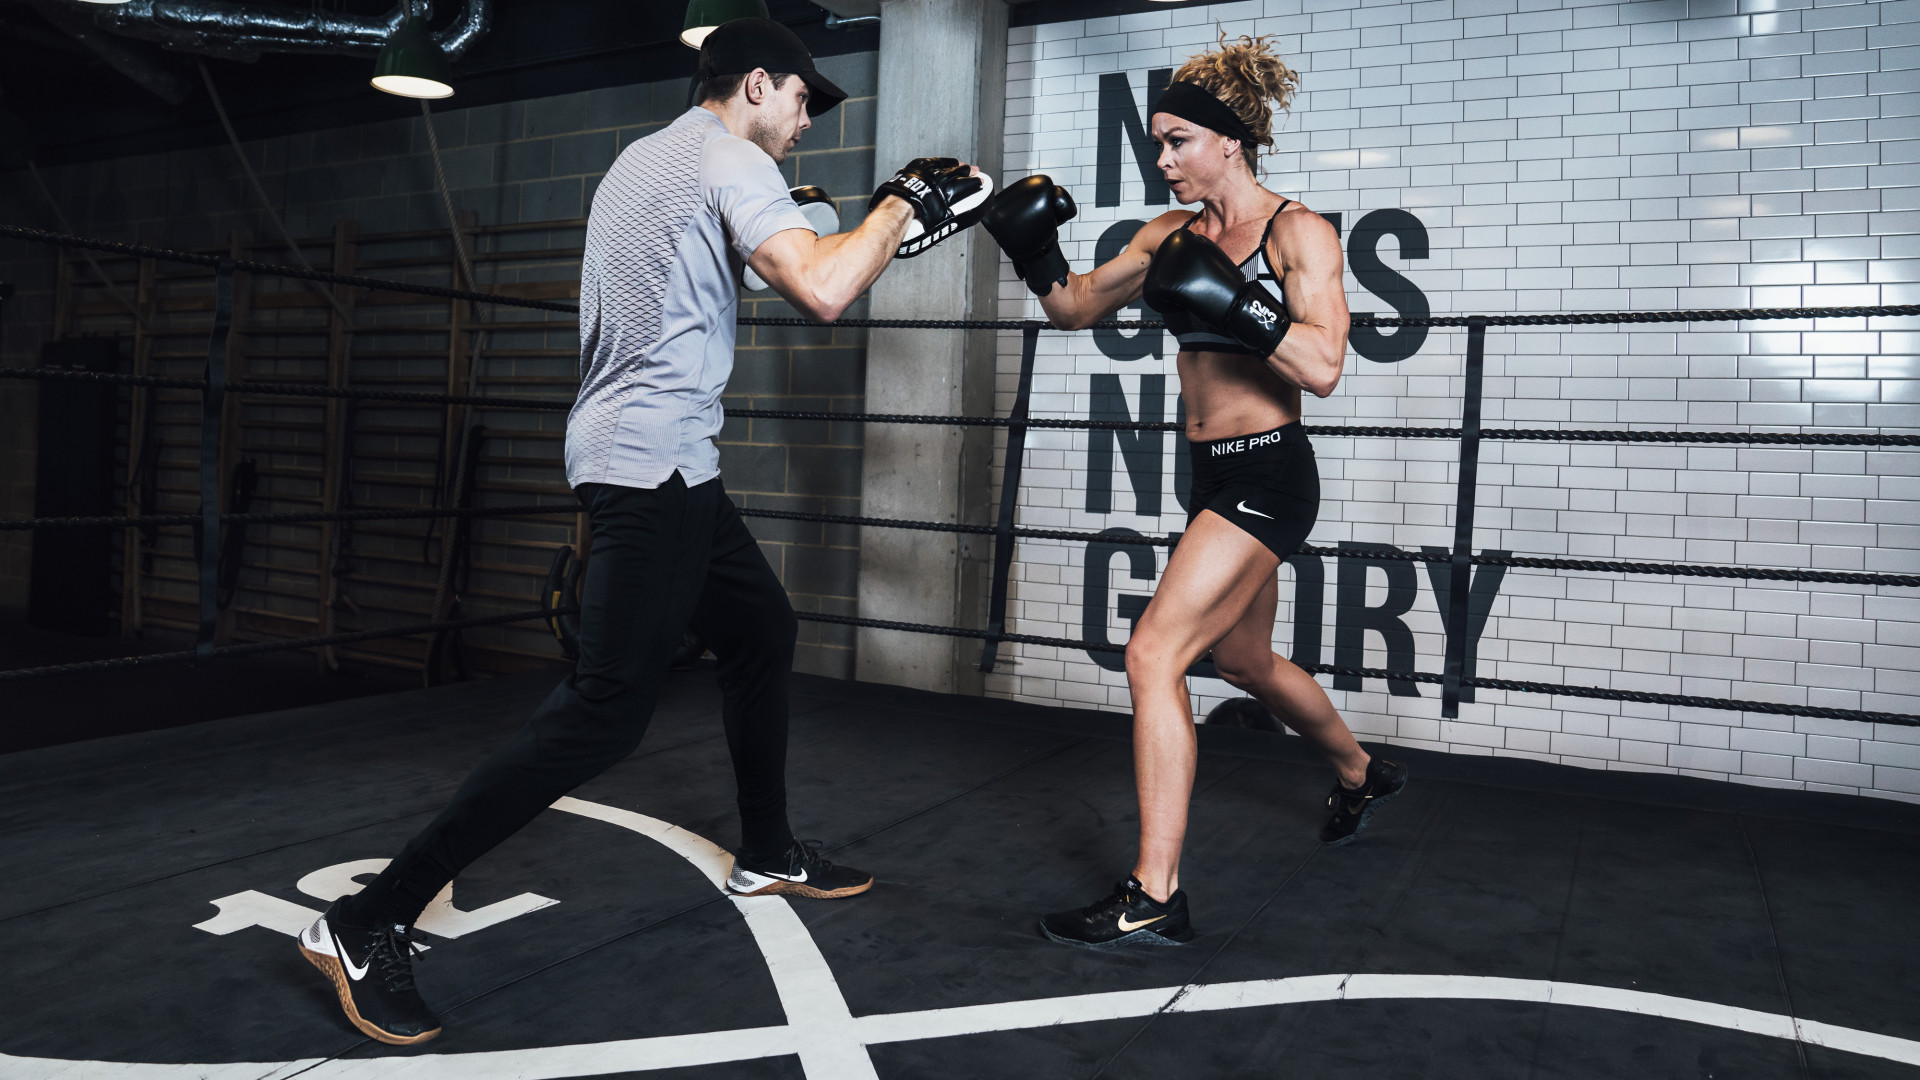 12 Best Boxing Gyms In London Square Mile.